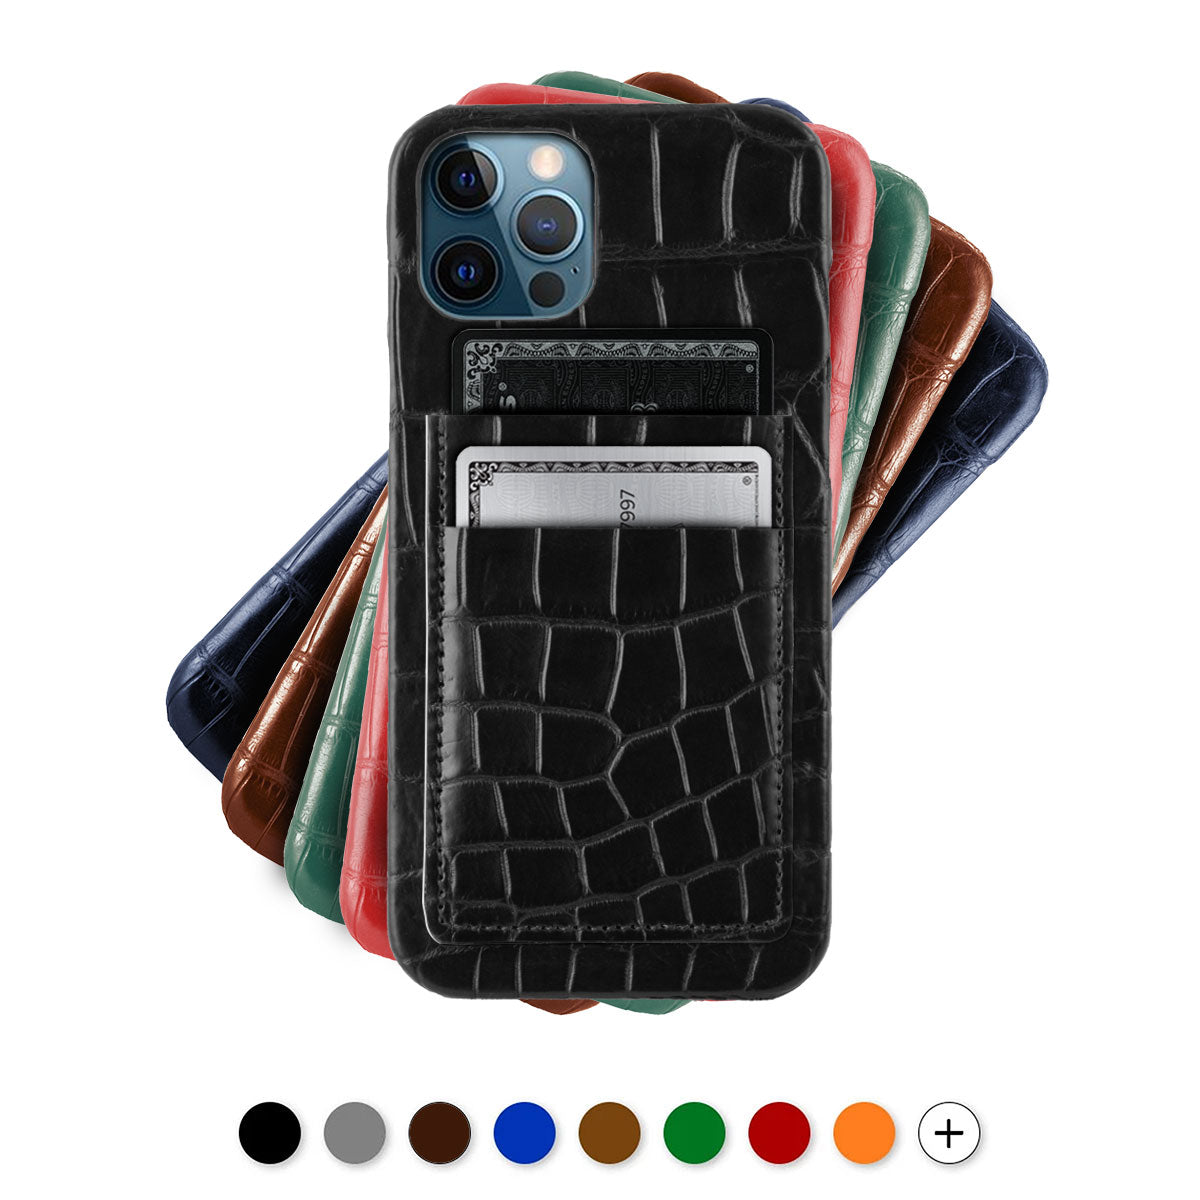 Leather iPhone " Double card case " / cover with credit card Pocket - iPhone 12 & 11 ( Pro / Max / Mini )  - Genuine alligator